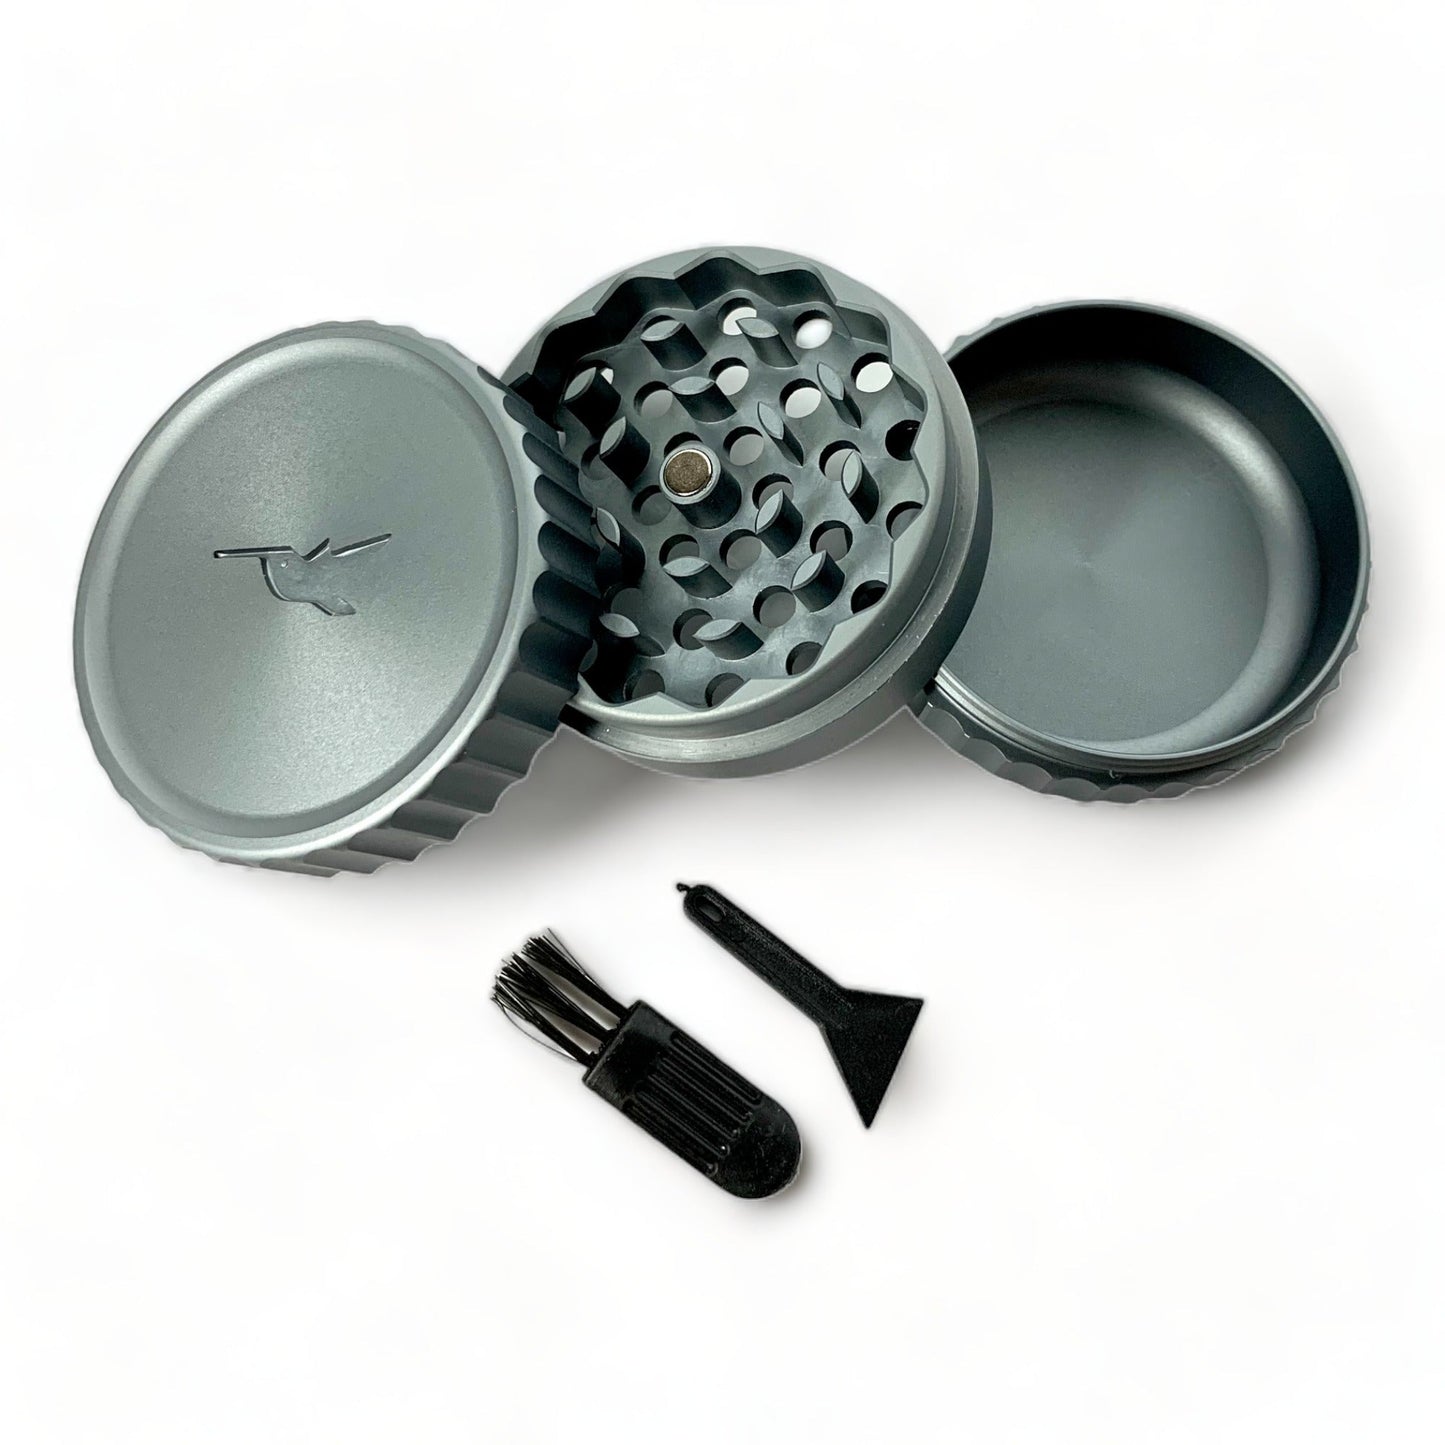 Nectar 55mm 3 Piece Herb Grinder - The Bong Baron